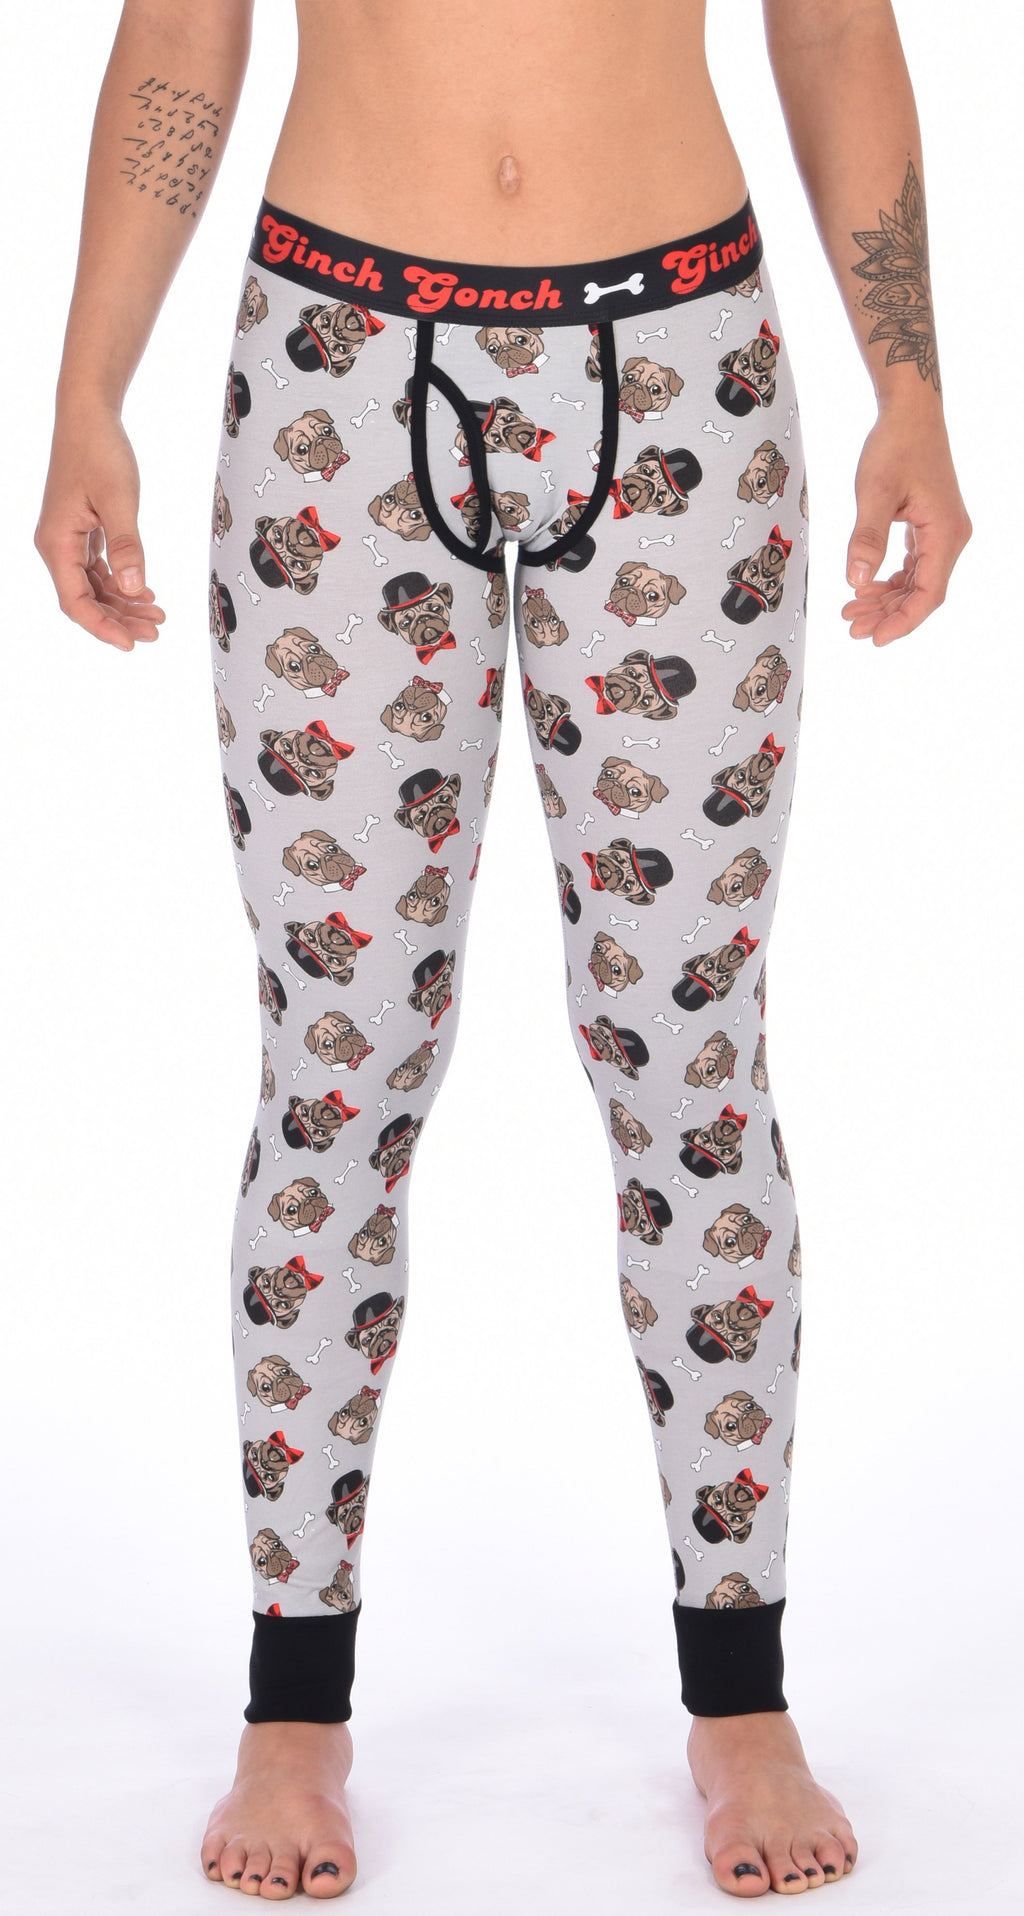 GG Ginch Gonch Pug Life leggings long johns - women's Underwear grey background with pugs with top hats and bow ties and bones. Black trim and y front with black printed waistband front. 